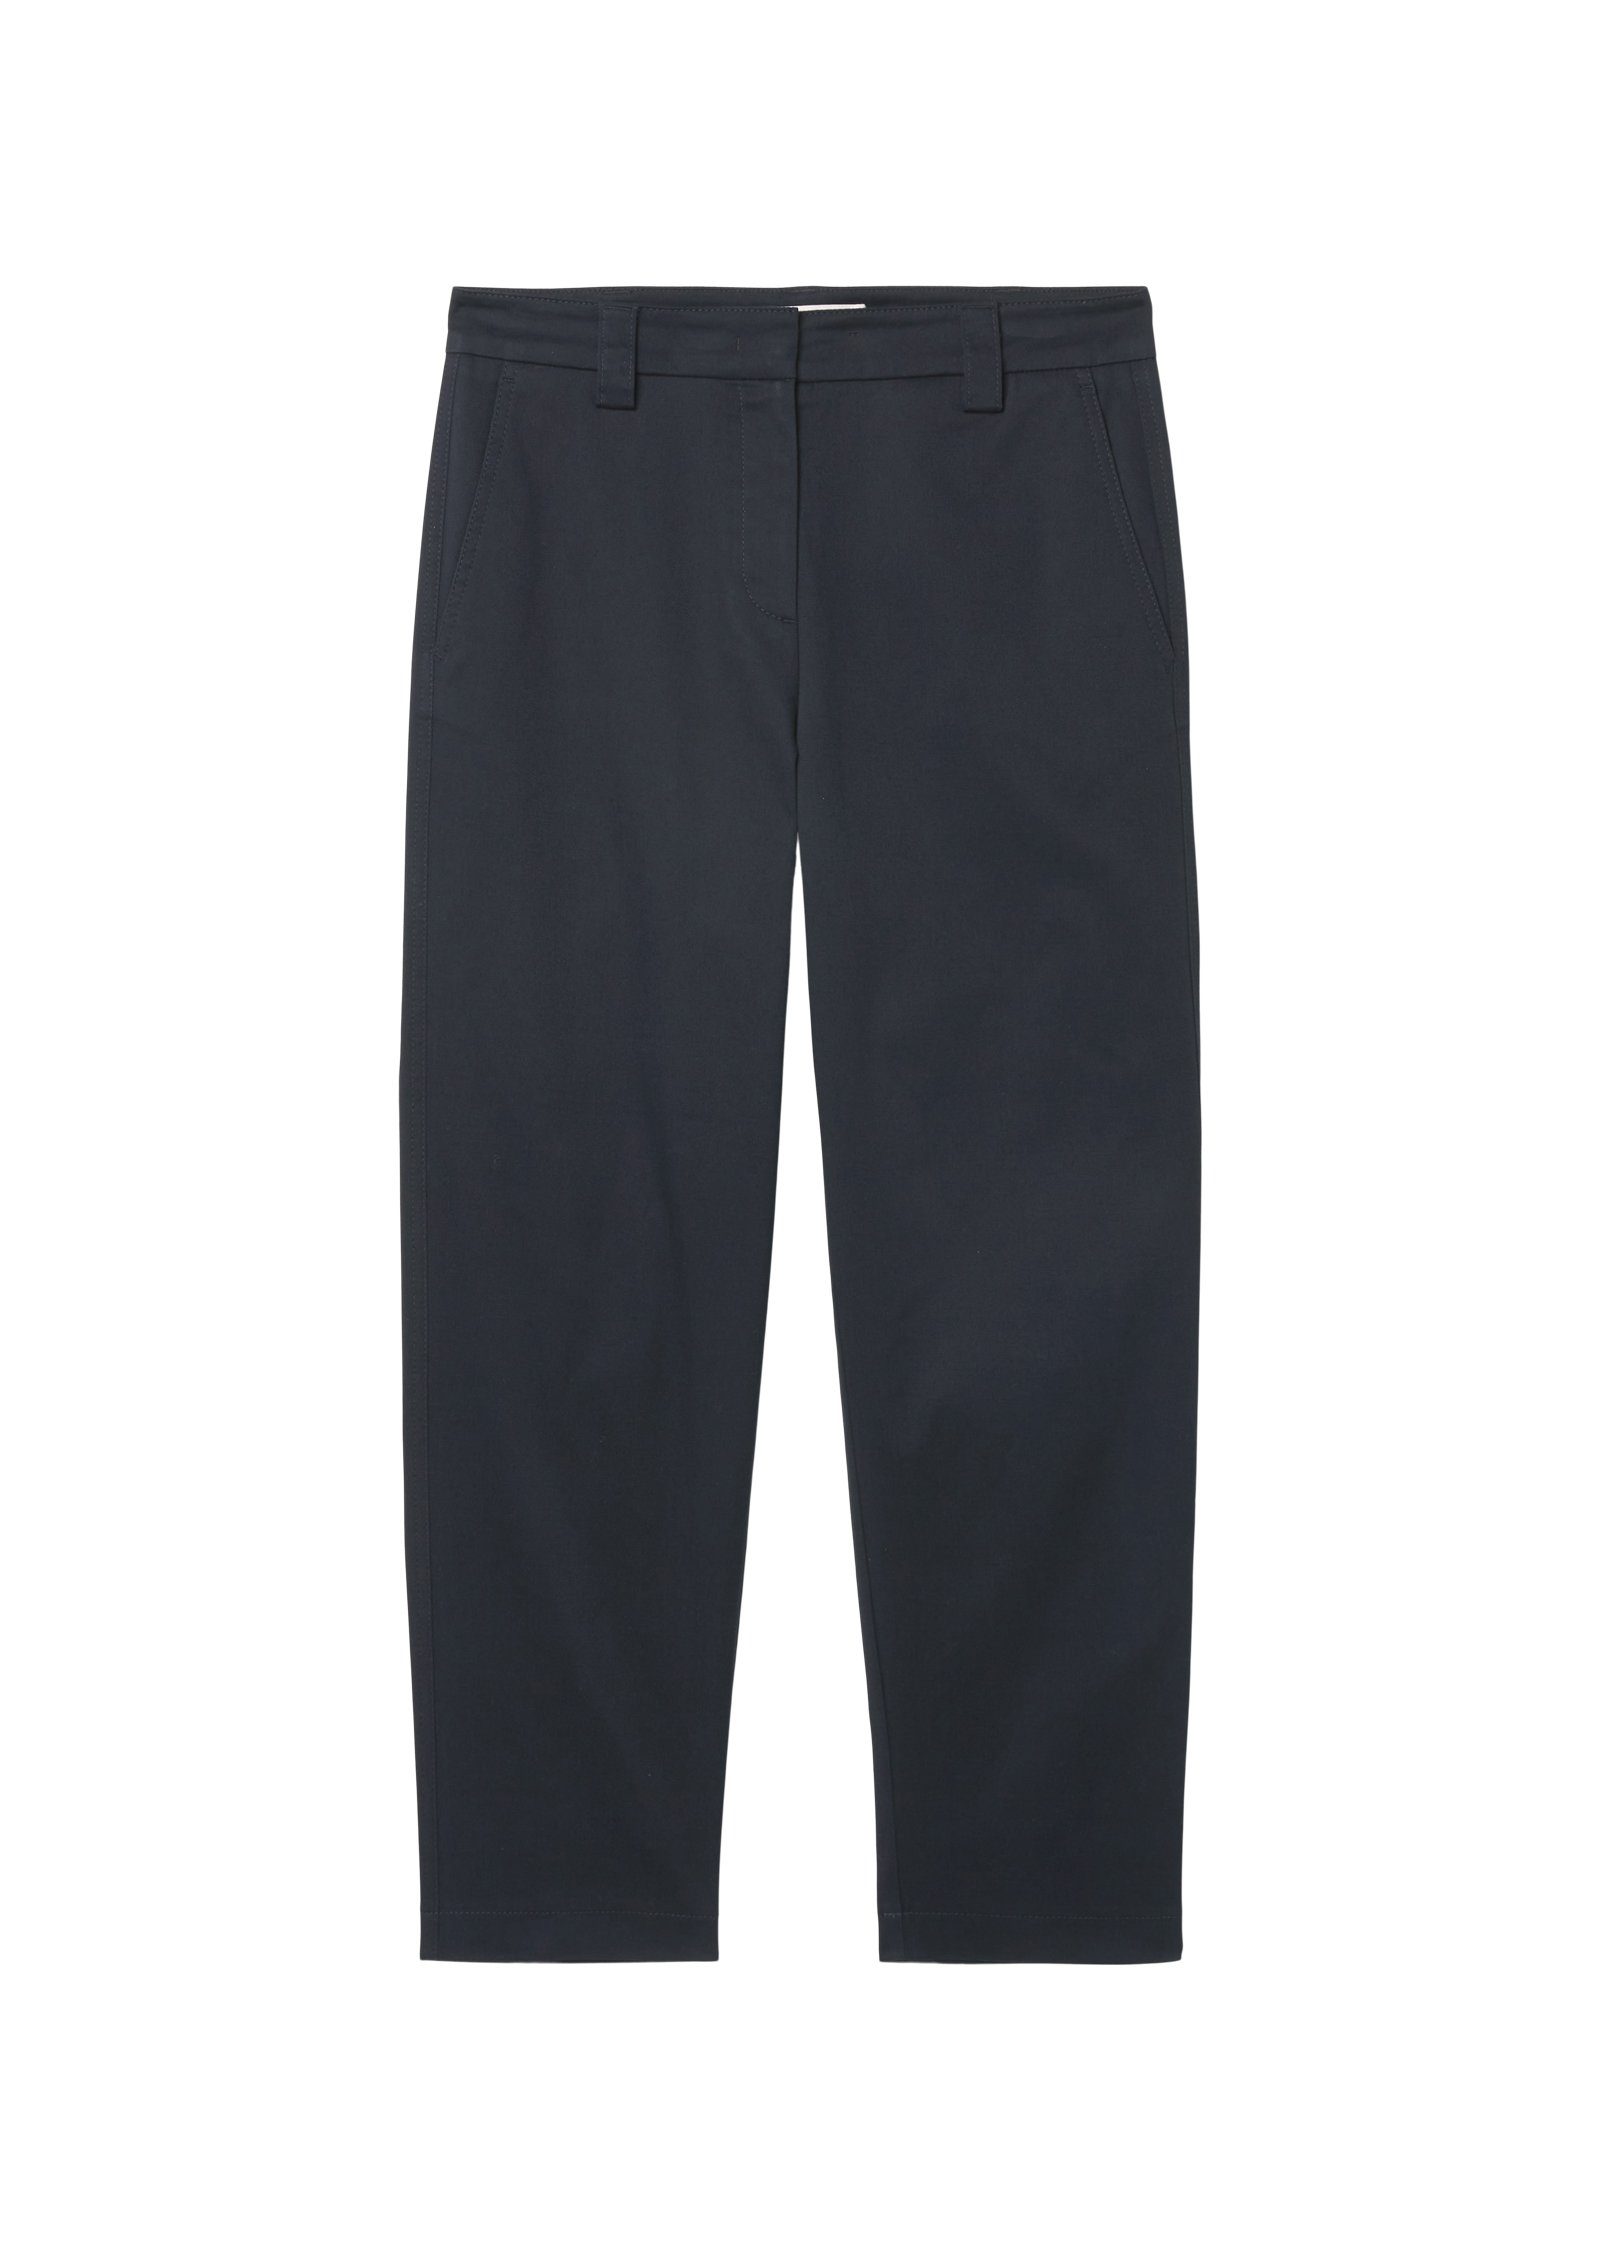 Pants, welt style, 7/8-Hose leg, modernen O'Polo chino thunder Chino-Style rise, modern high im tapered Marc pocket blue